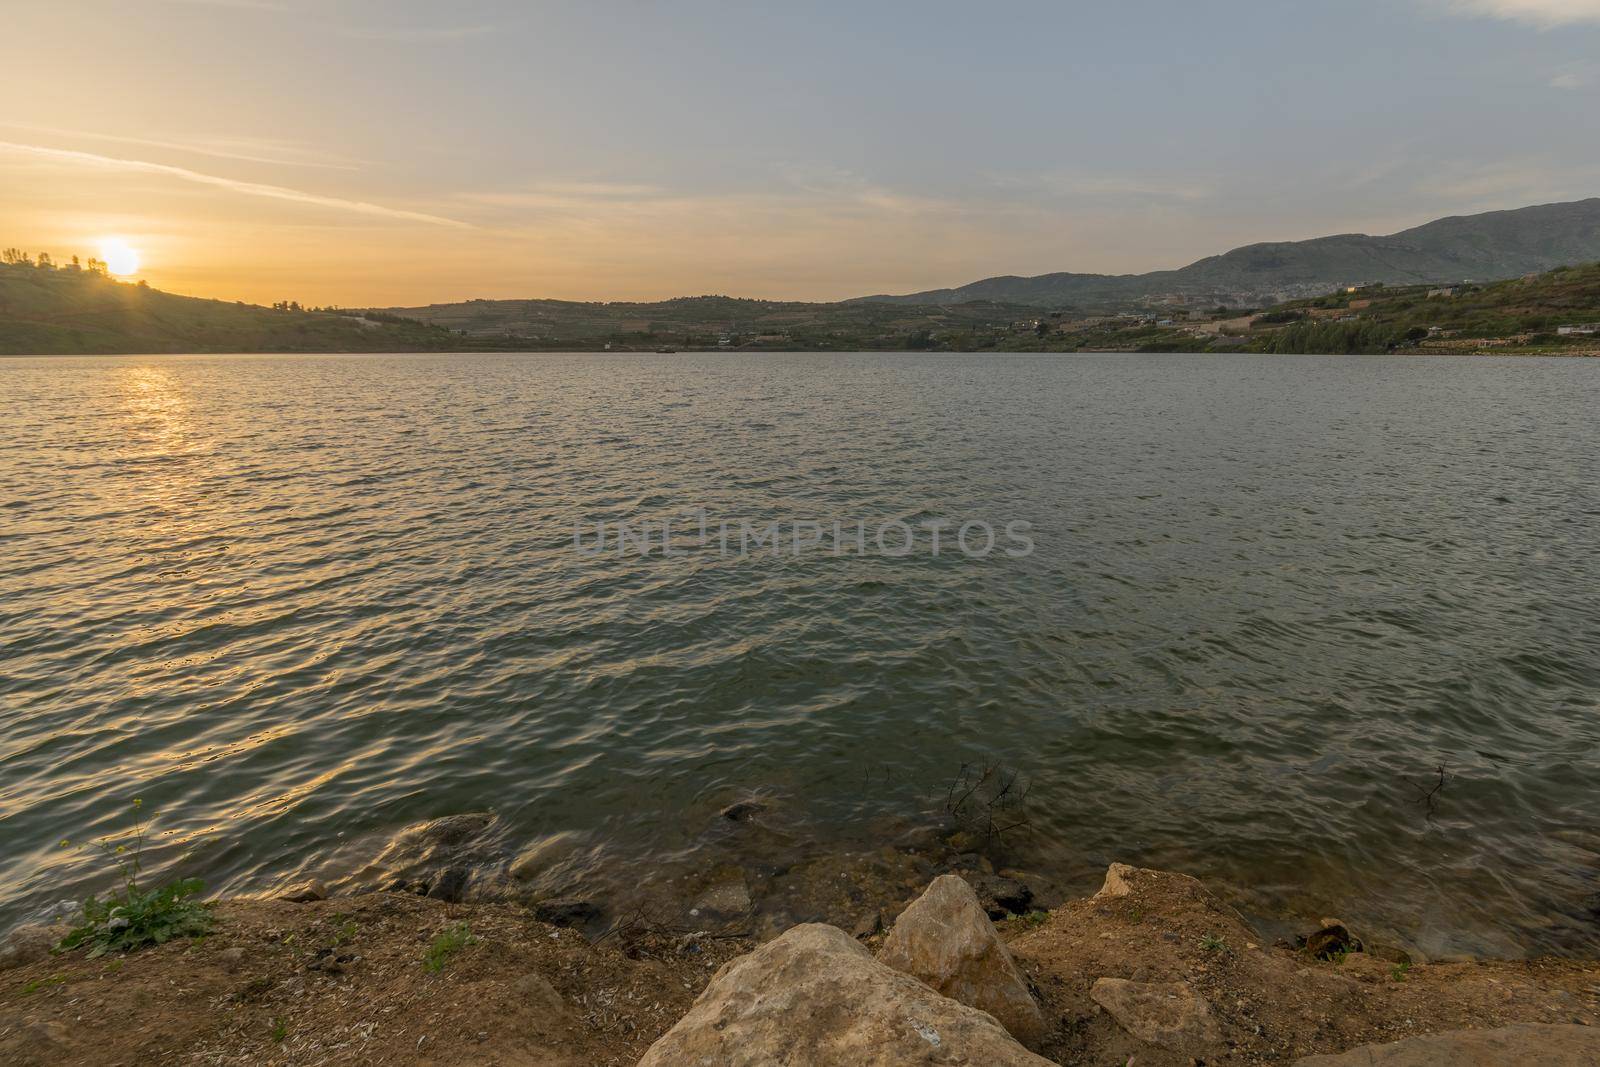 Sunset view of Lake Ram (Ram Pool) in the Golan Heights, Northern Israel